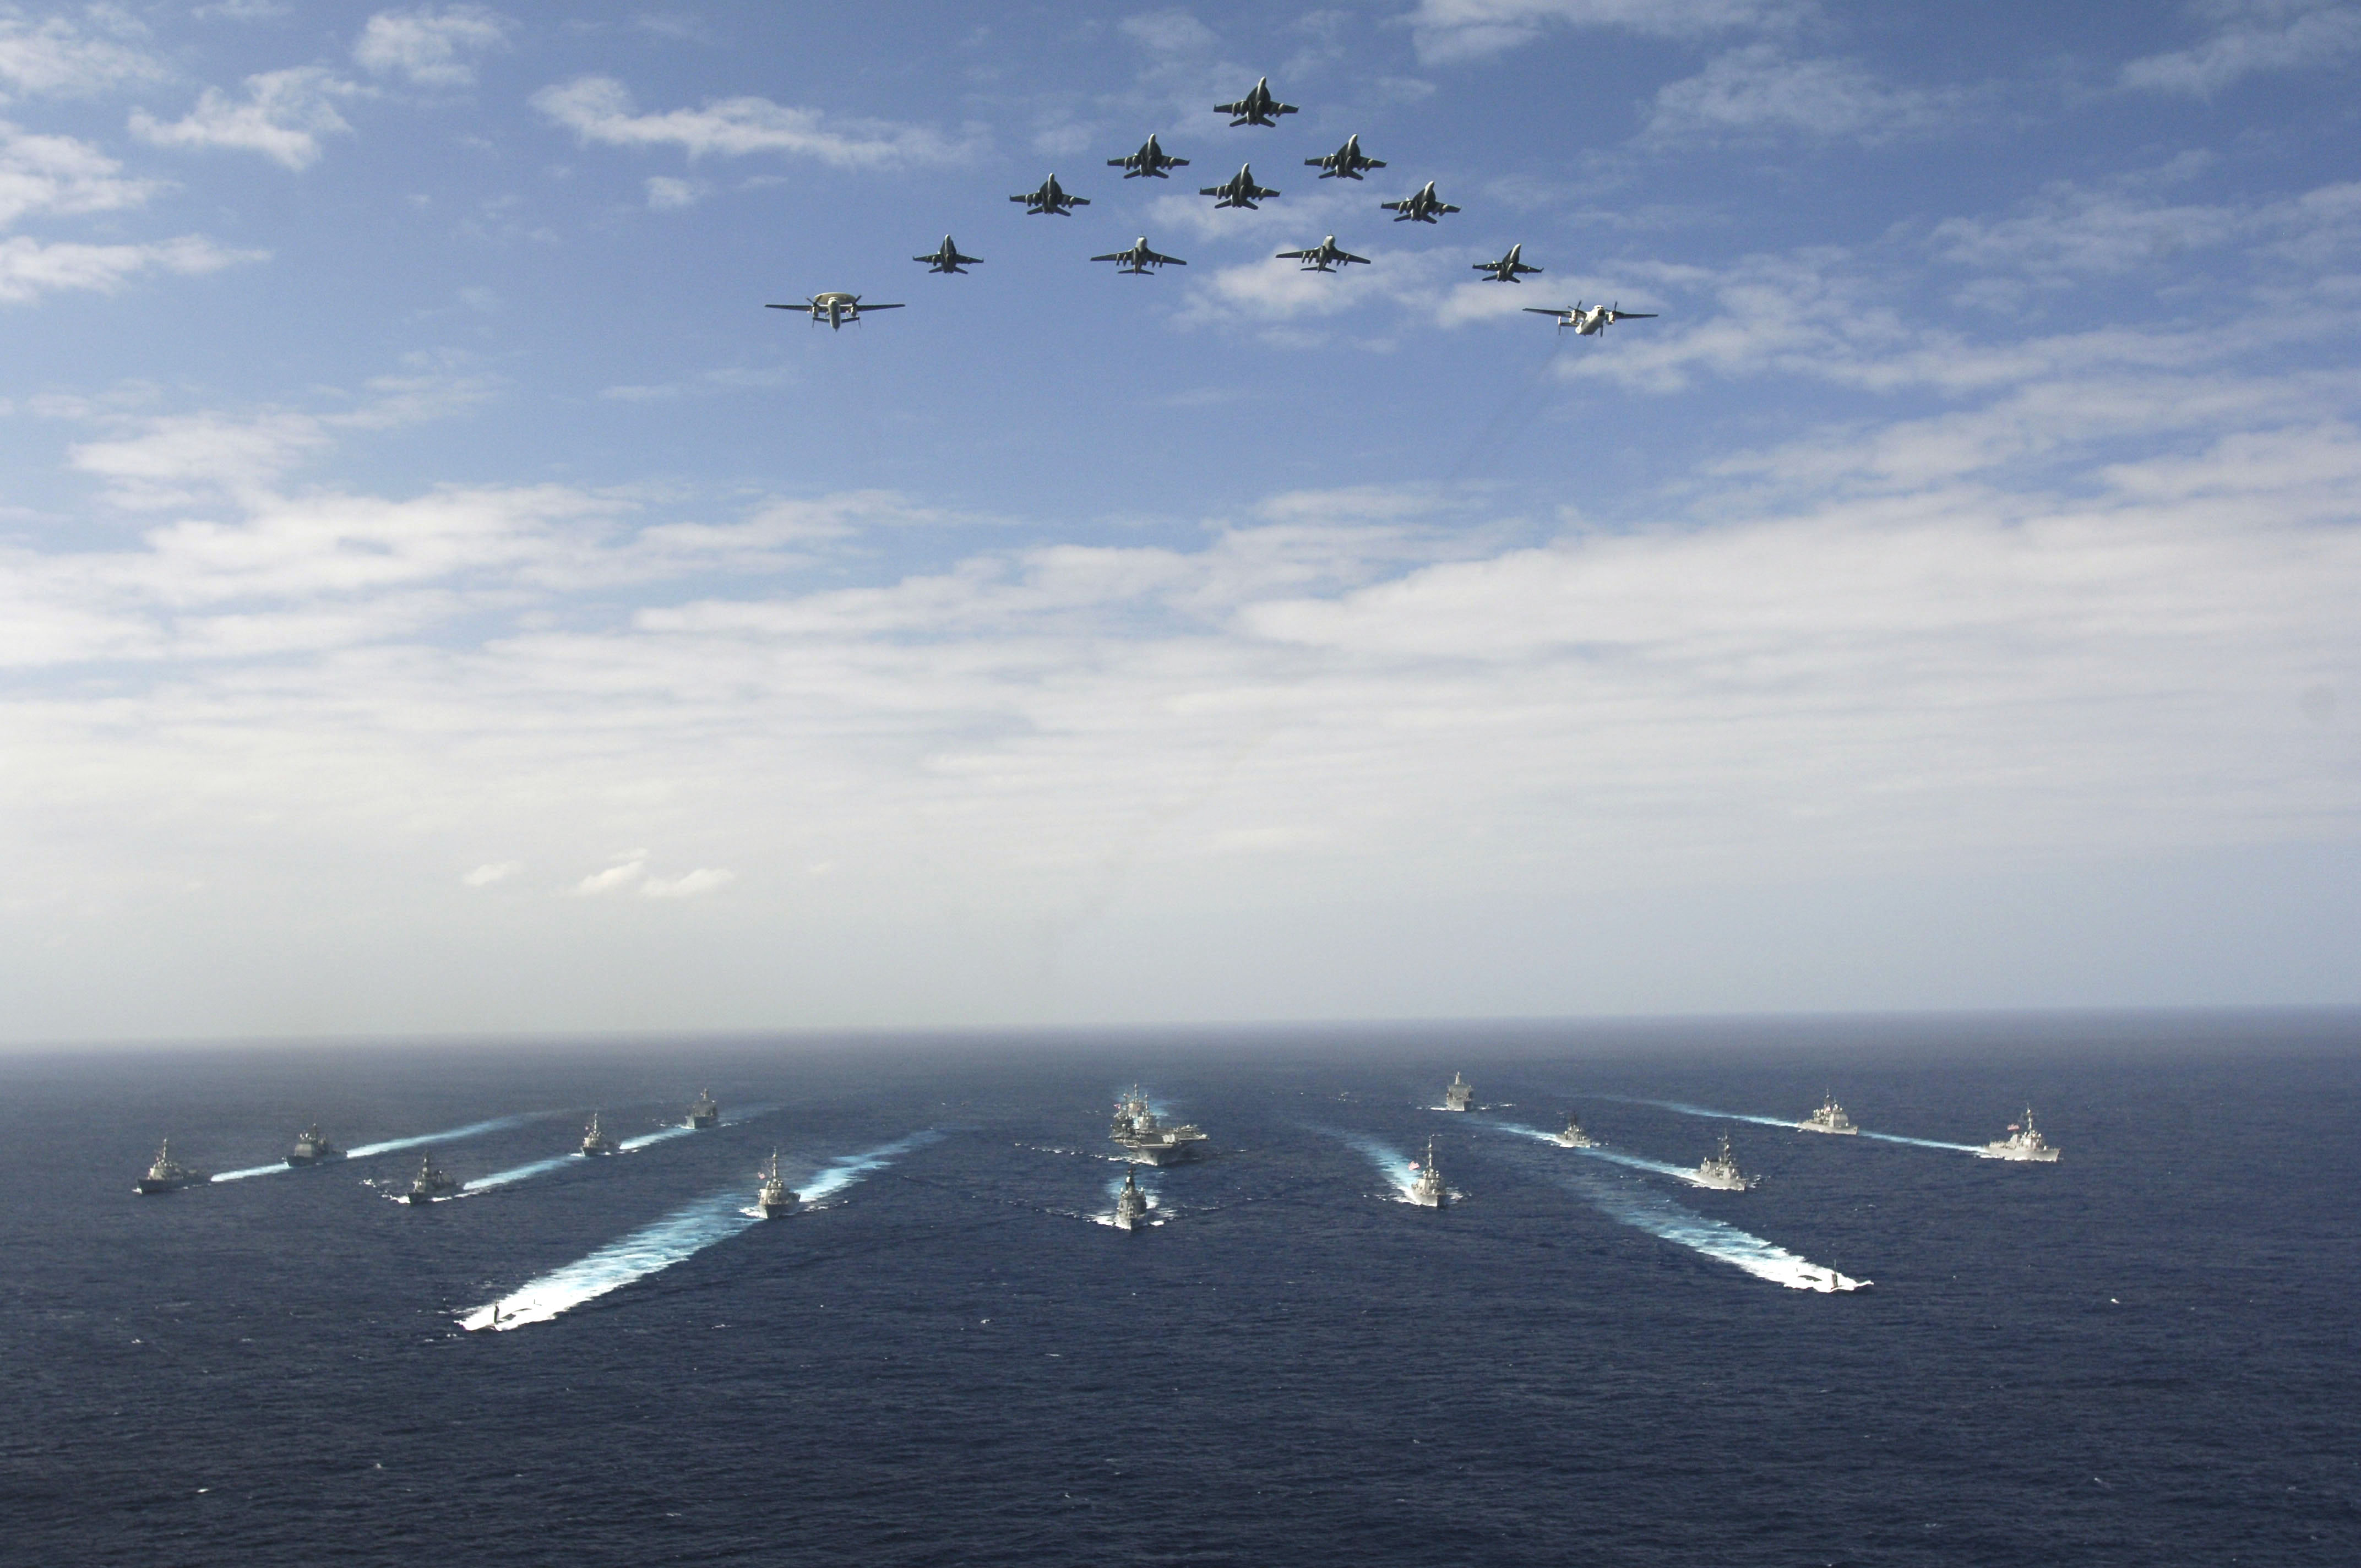 US_Navy_061114-N-8591H-147_Aircraft_assigned_to_Carrier_Air_Wing_Five_(CVW-5)_fly_over_a_group_of_18_U.S._and_Japanese_Maritime_Self-Defense_Force_ships,_at_the_conclusion_the_two_nations'_exercise_ANNUALEX.jpg